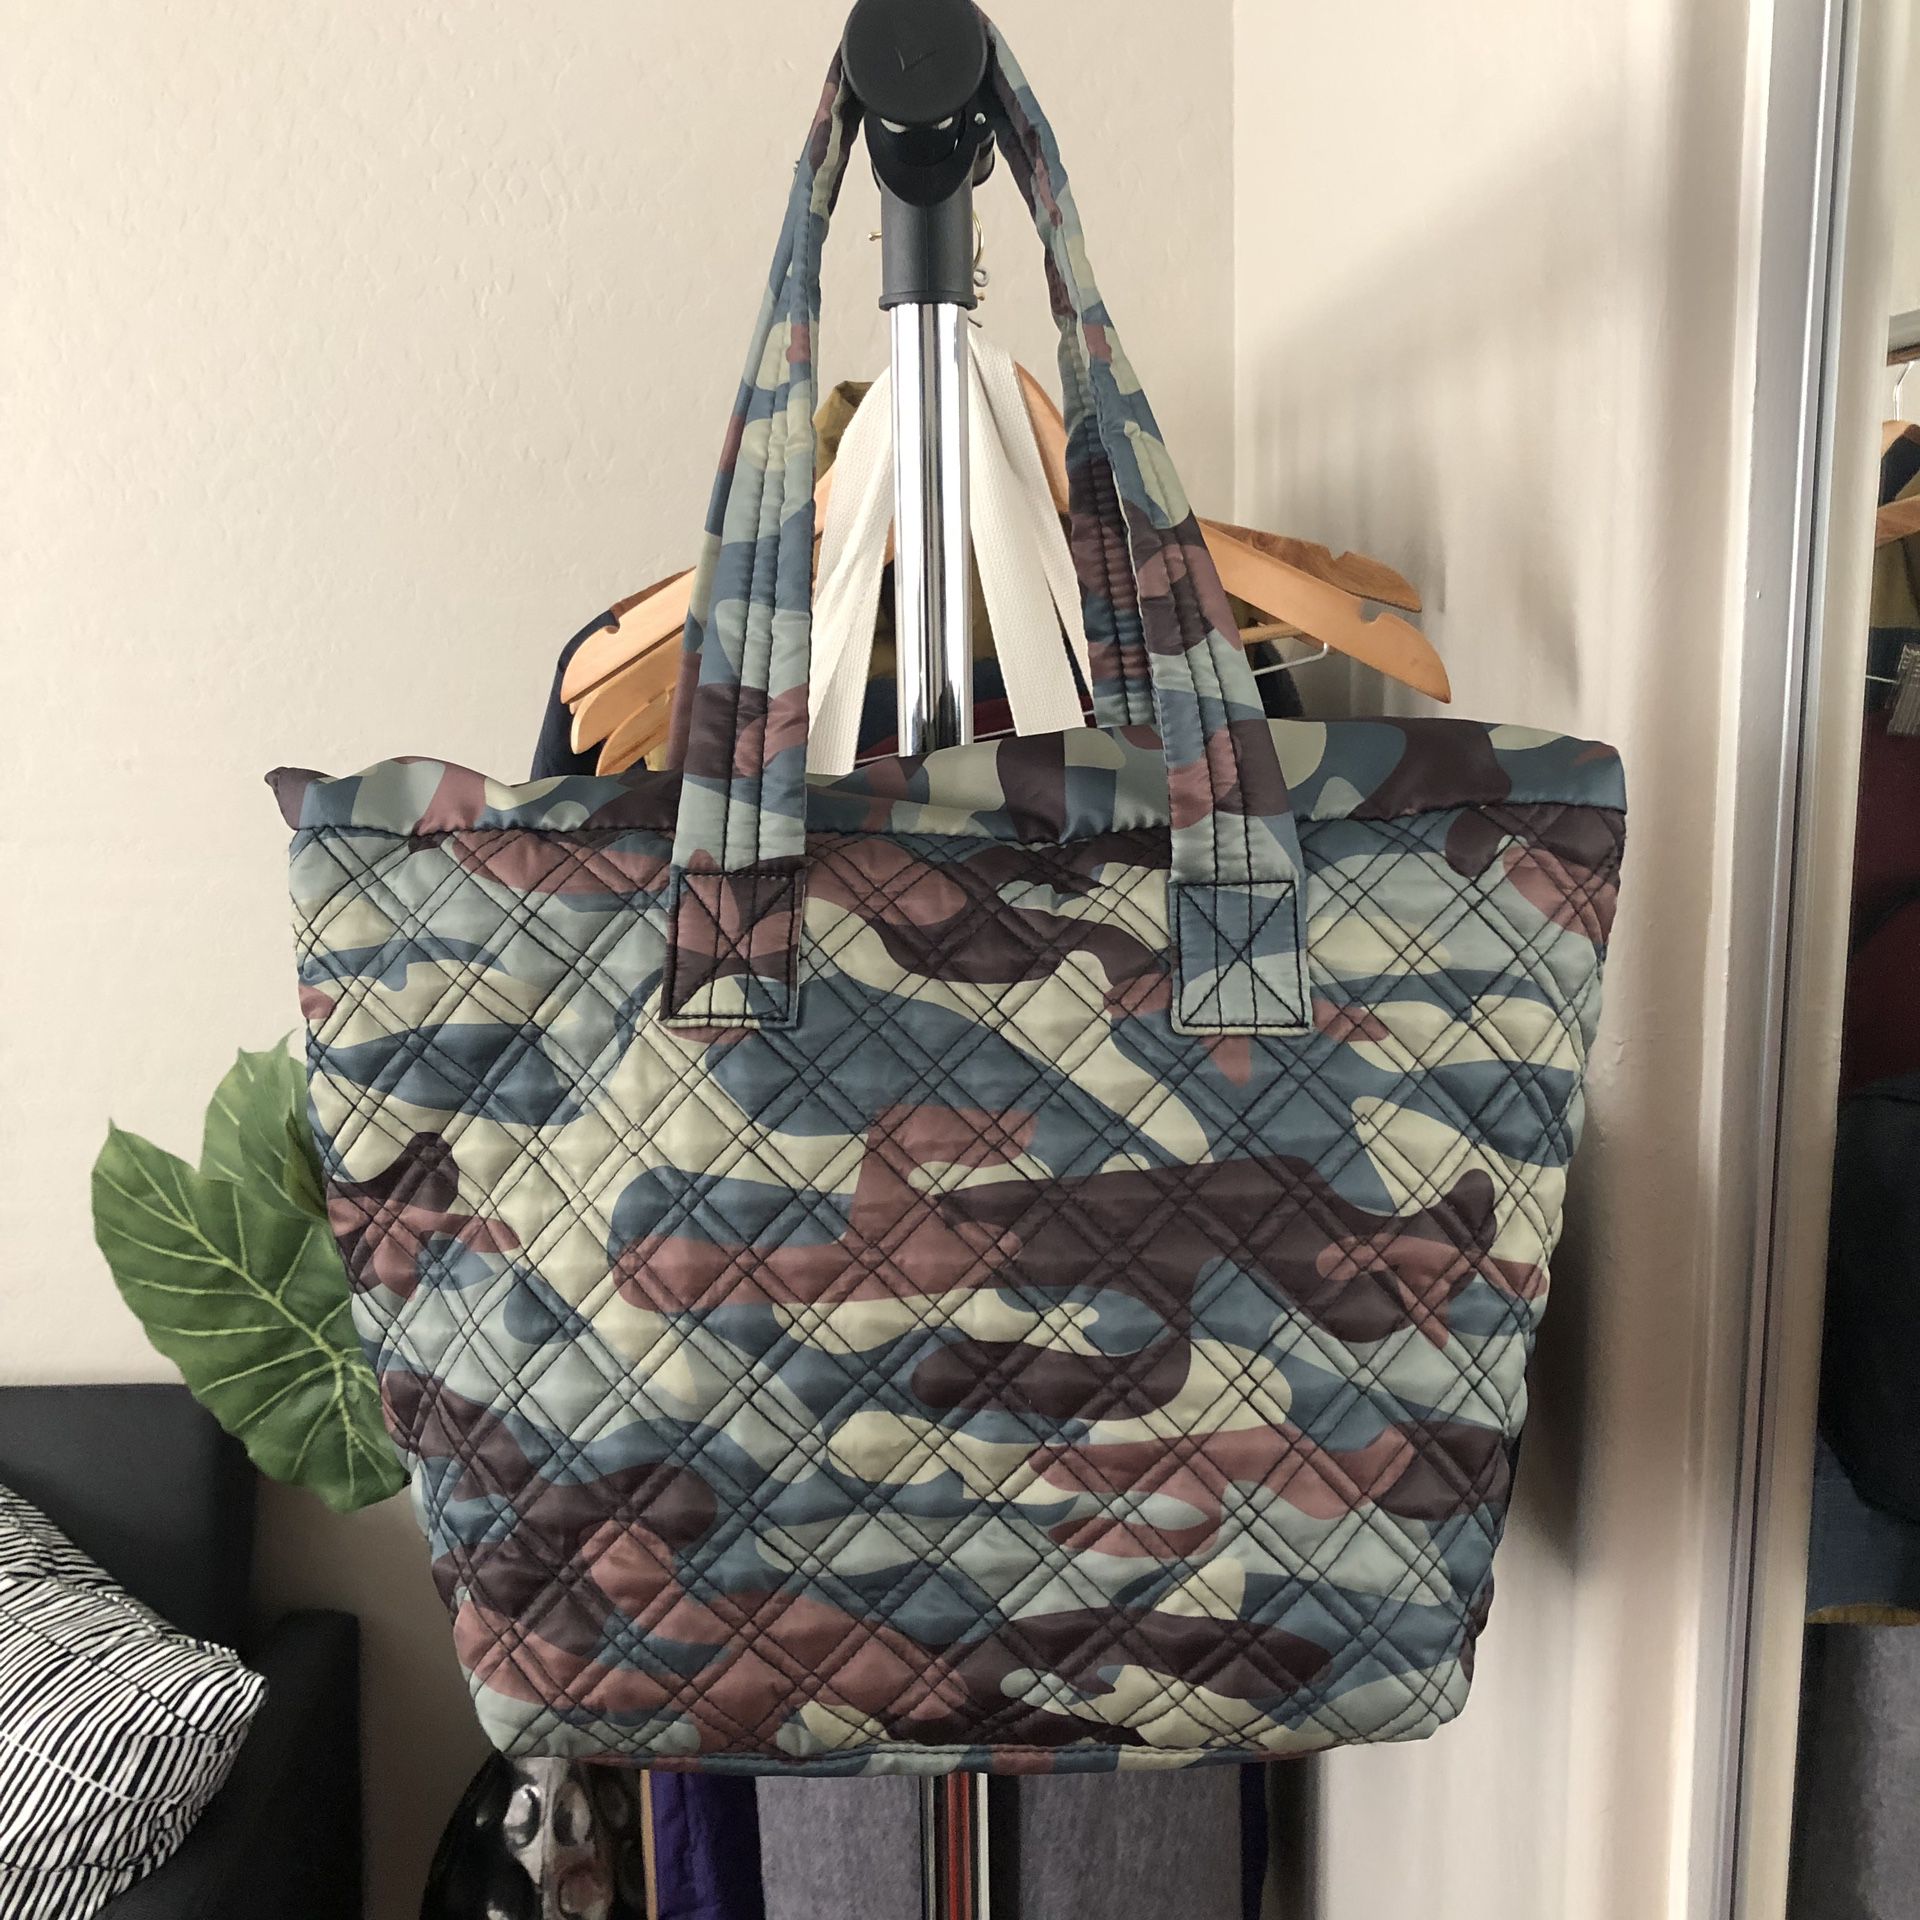 SR Squared Sondra Roberts Quilted Camo Tote Bag -brand new